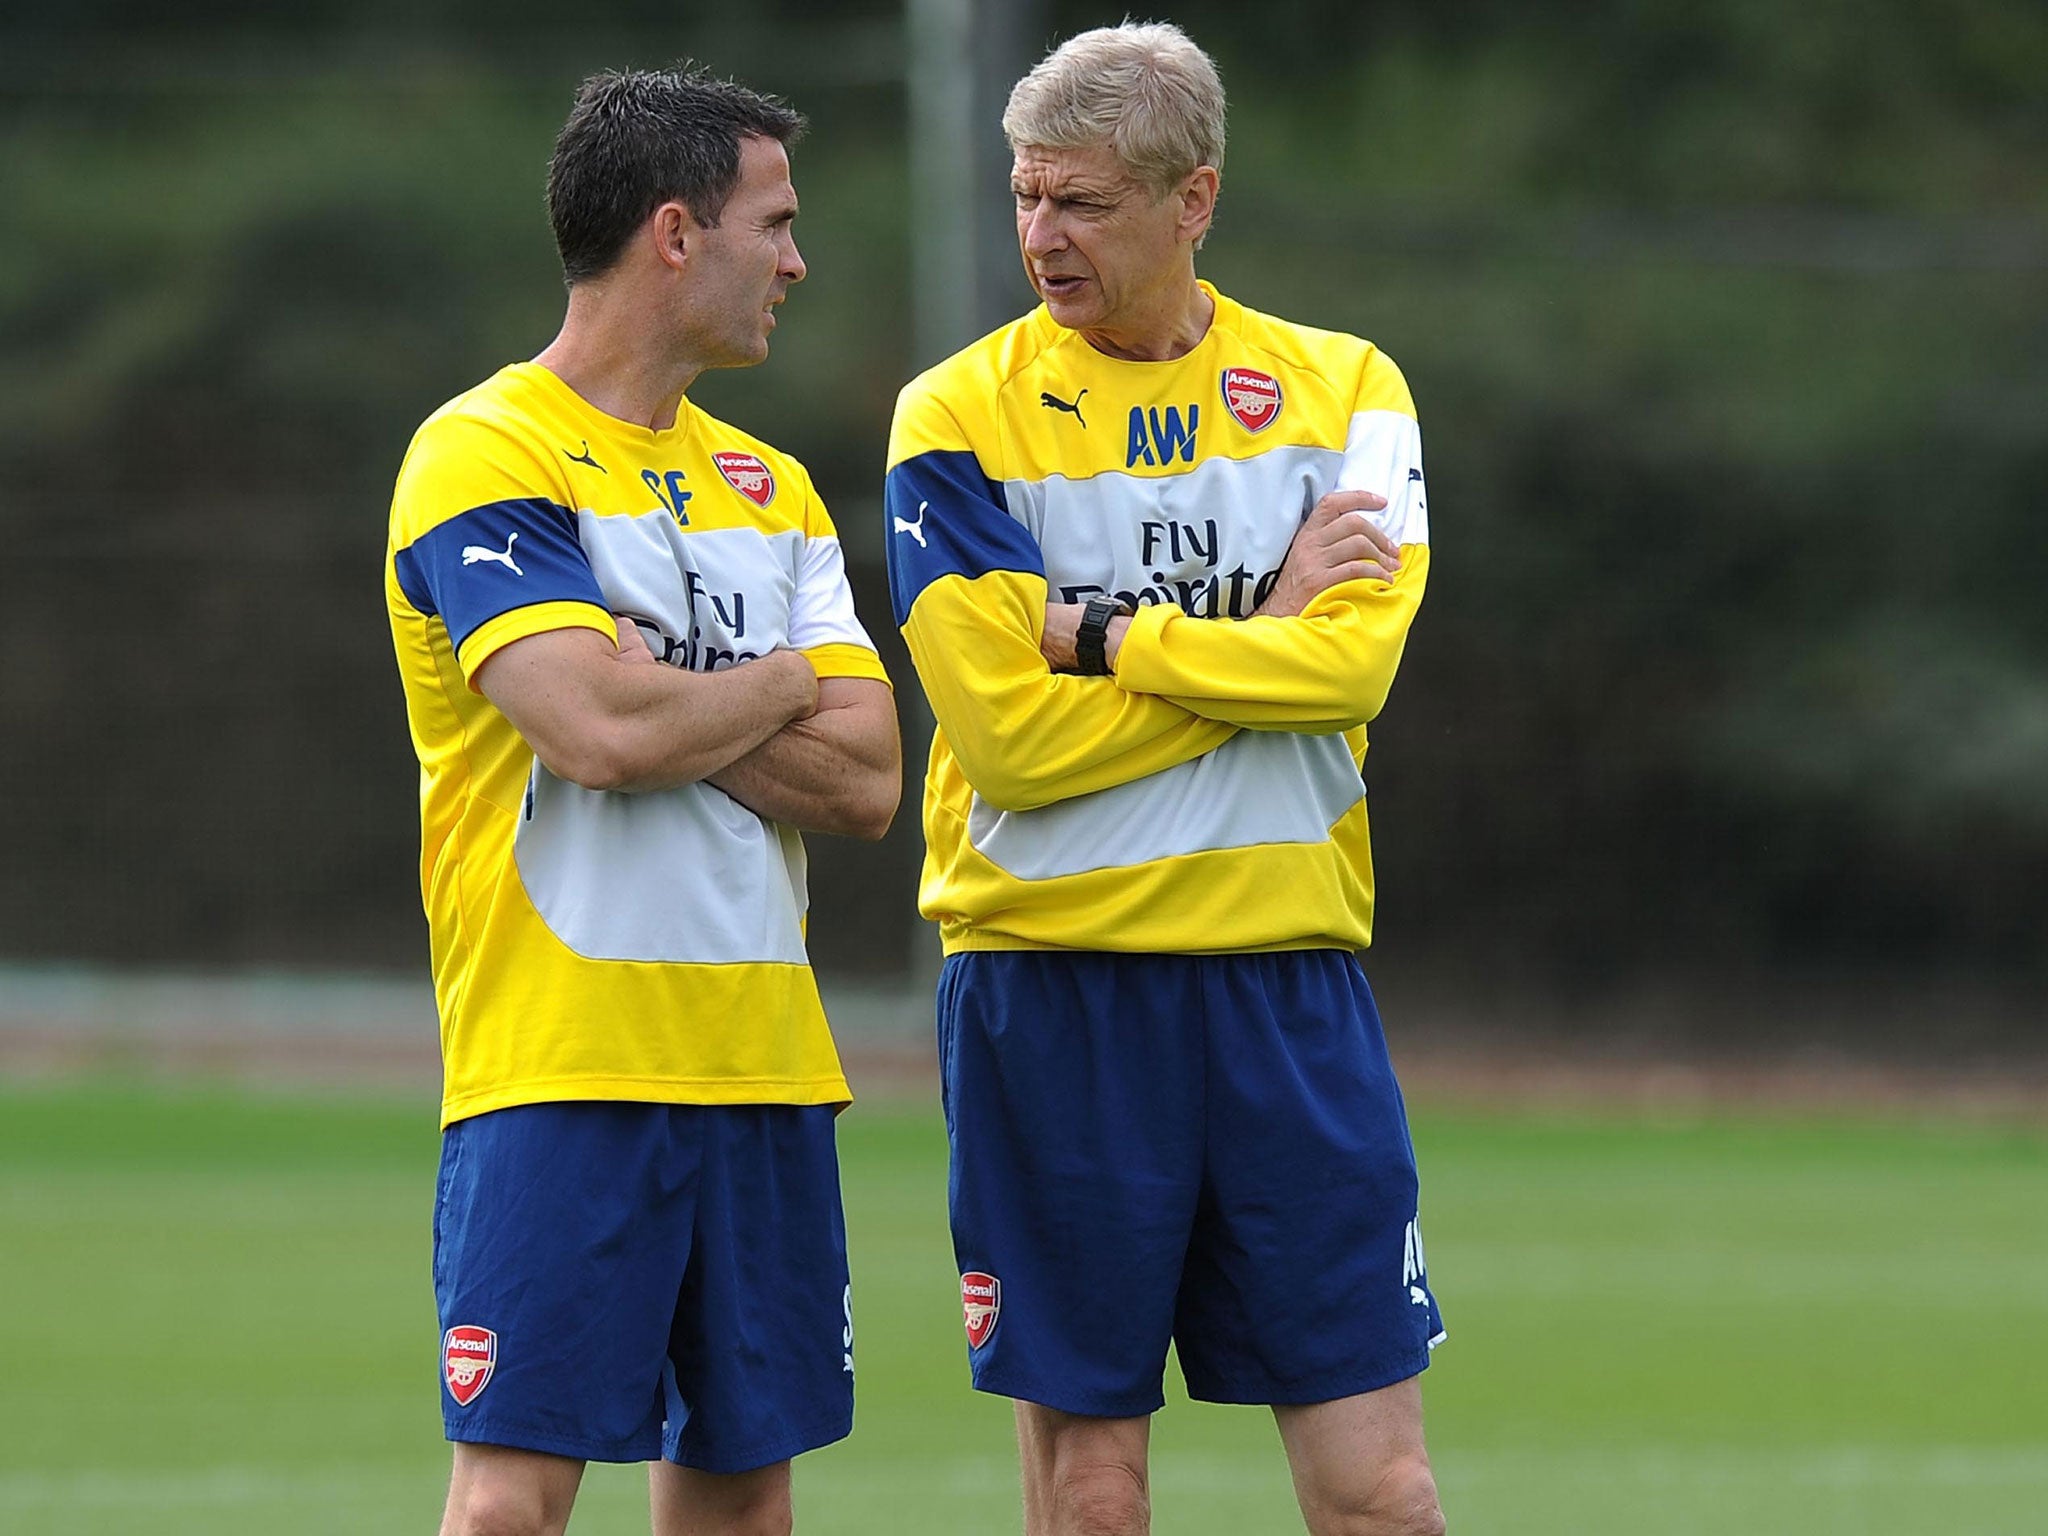 Arsenal manager Arsene Wenger (right) converses with newly appointed fitness coach Shad Forsythe during the pre-season training